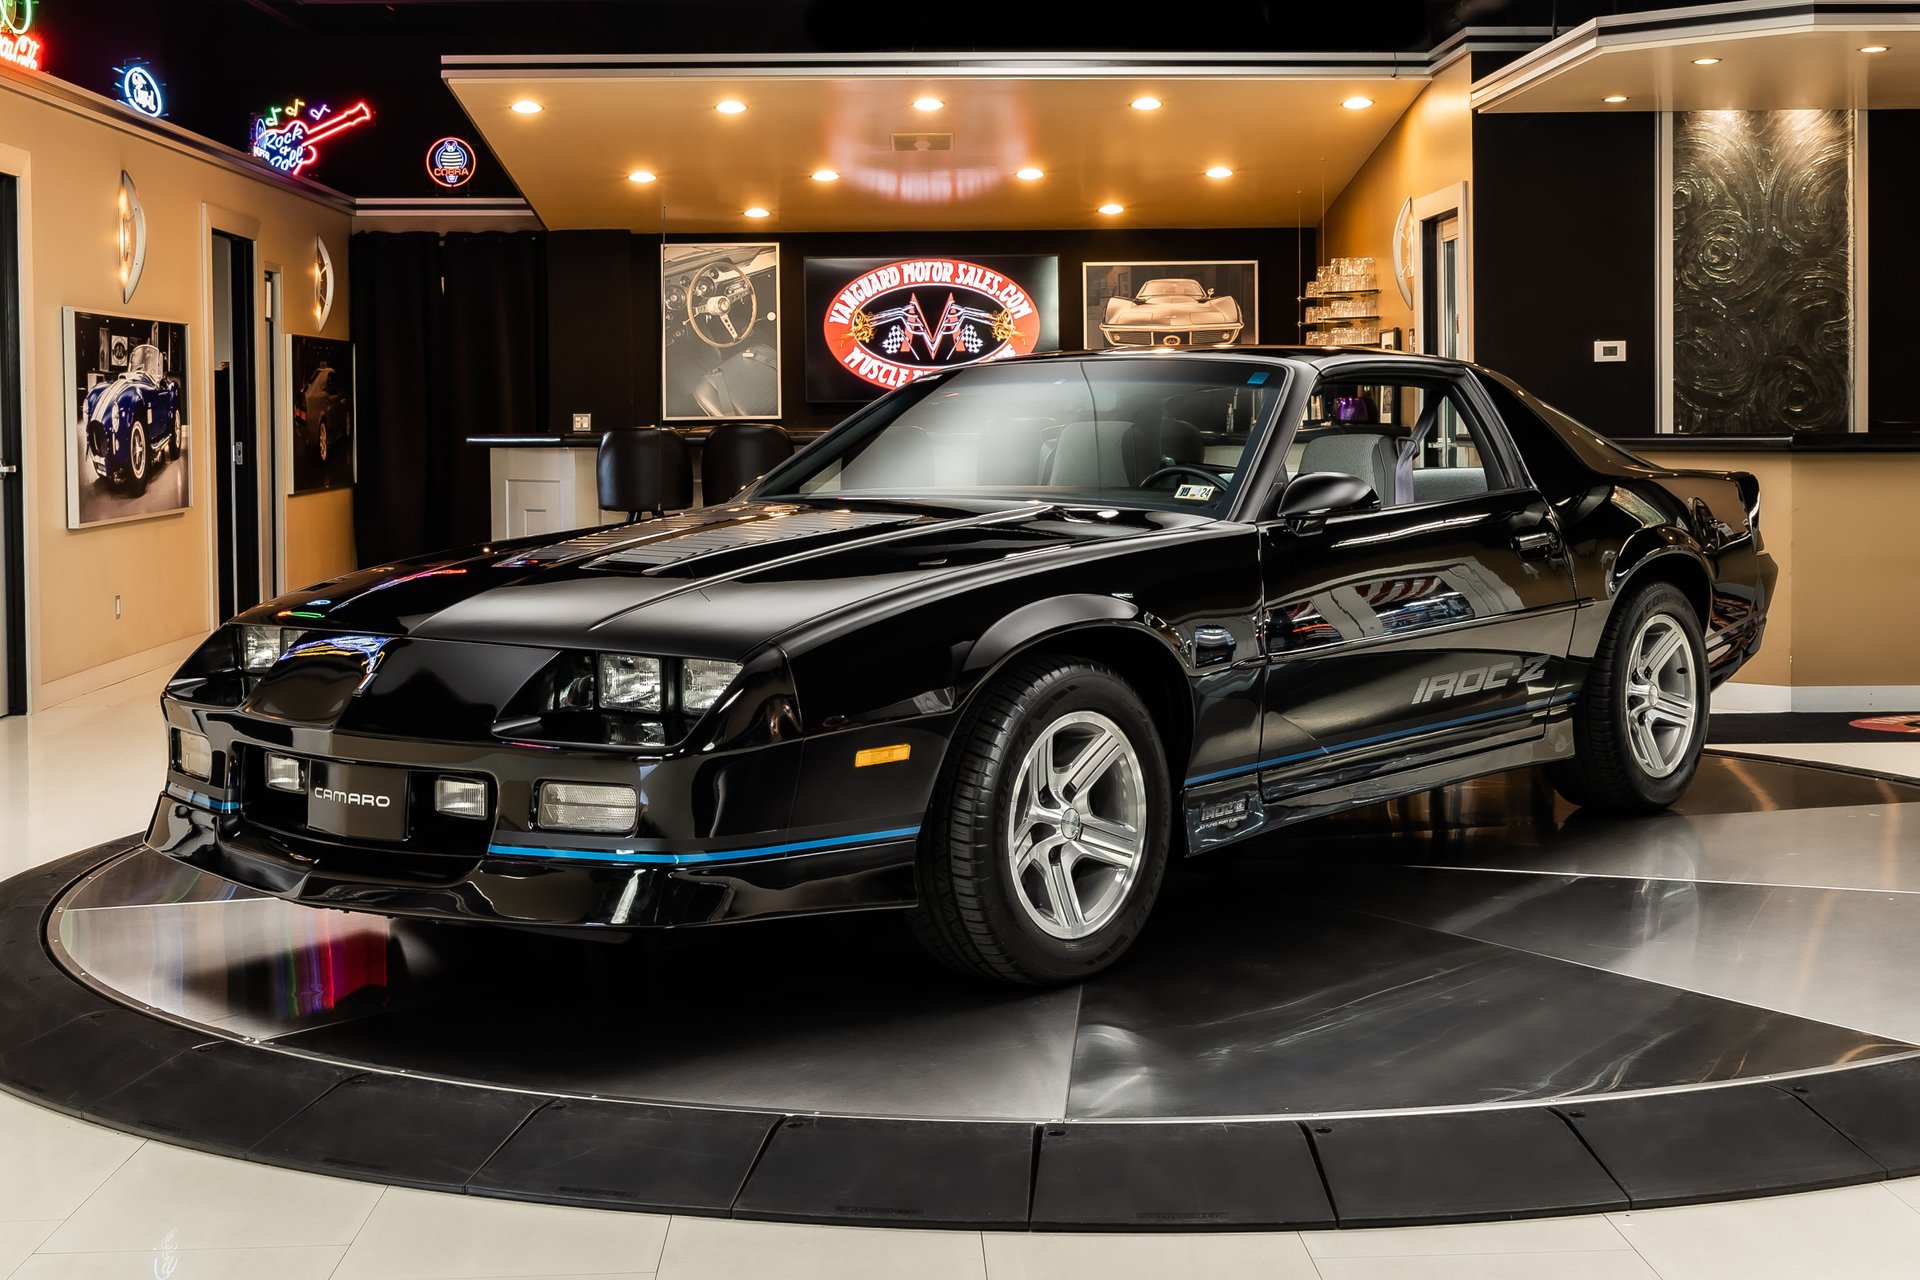 1989 Chevrolet Camaro | Classic Cars for Sale Michigan: Muscle & Old Cars |  Vanguard Motor Sales